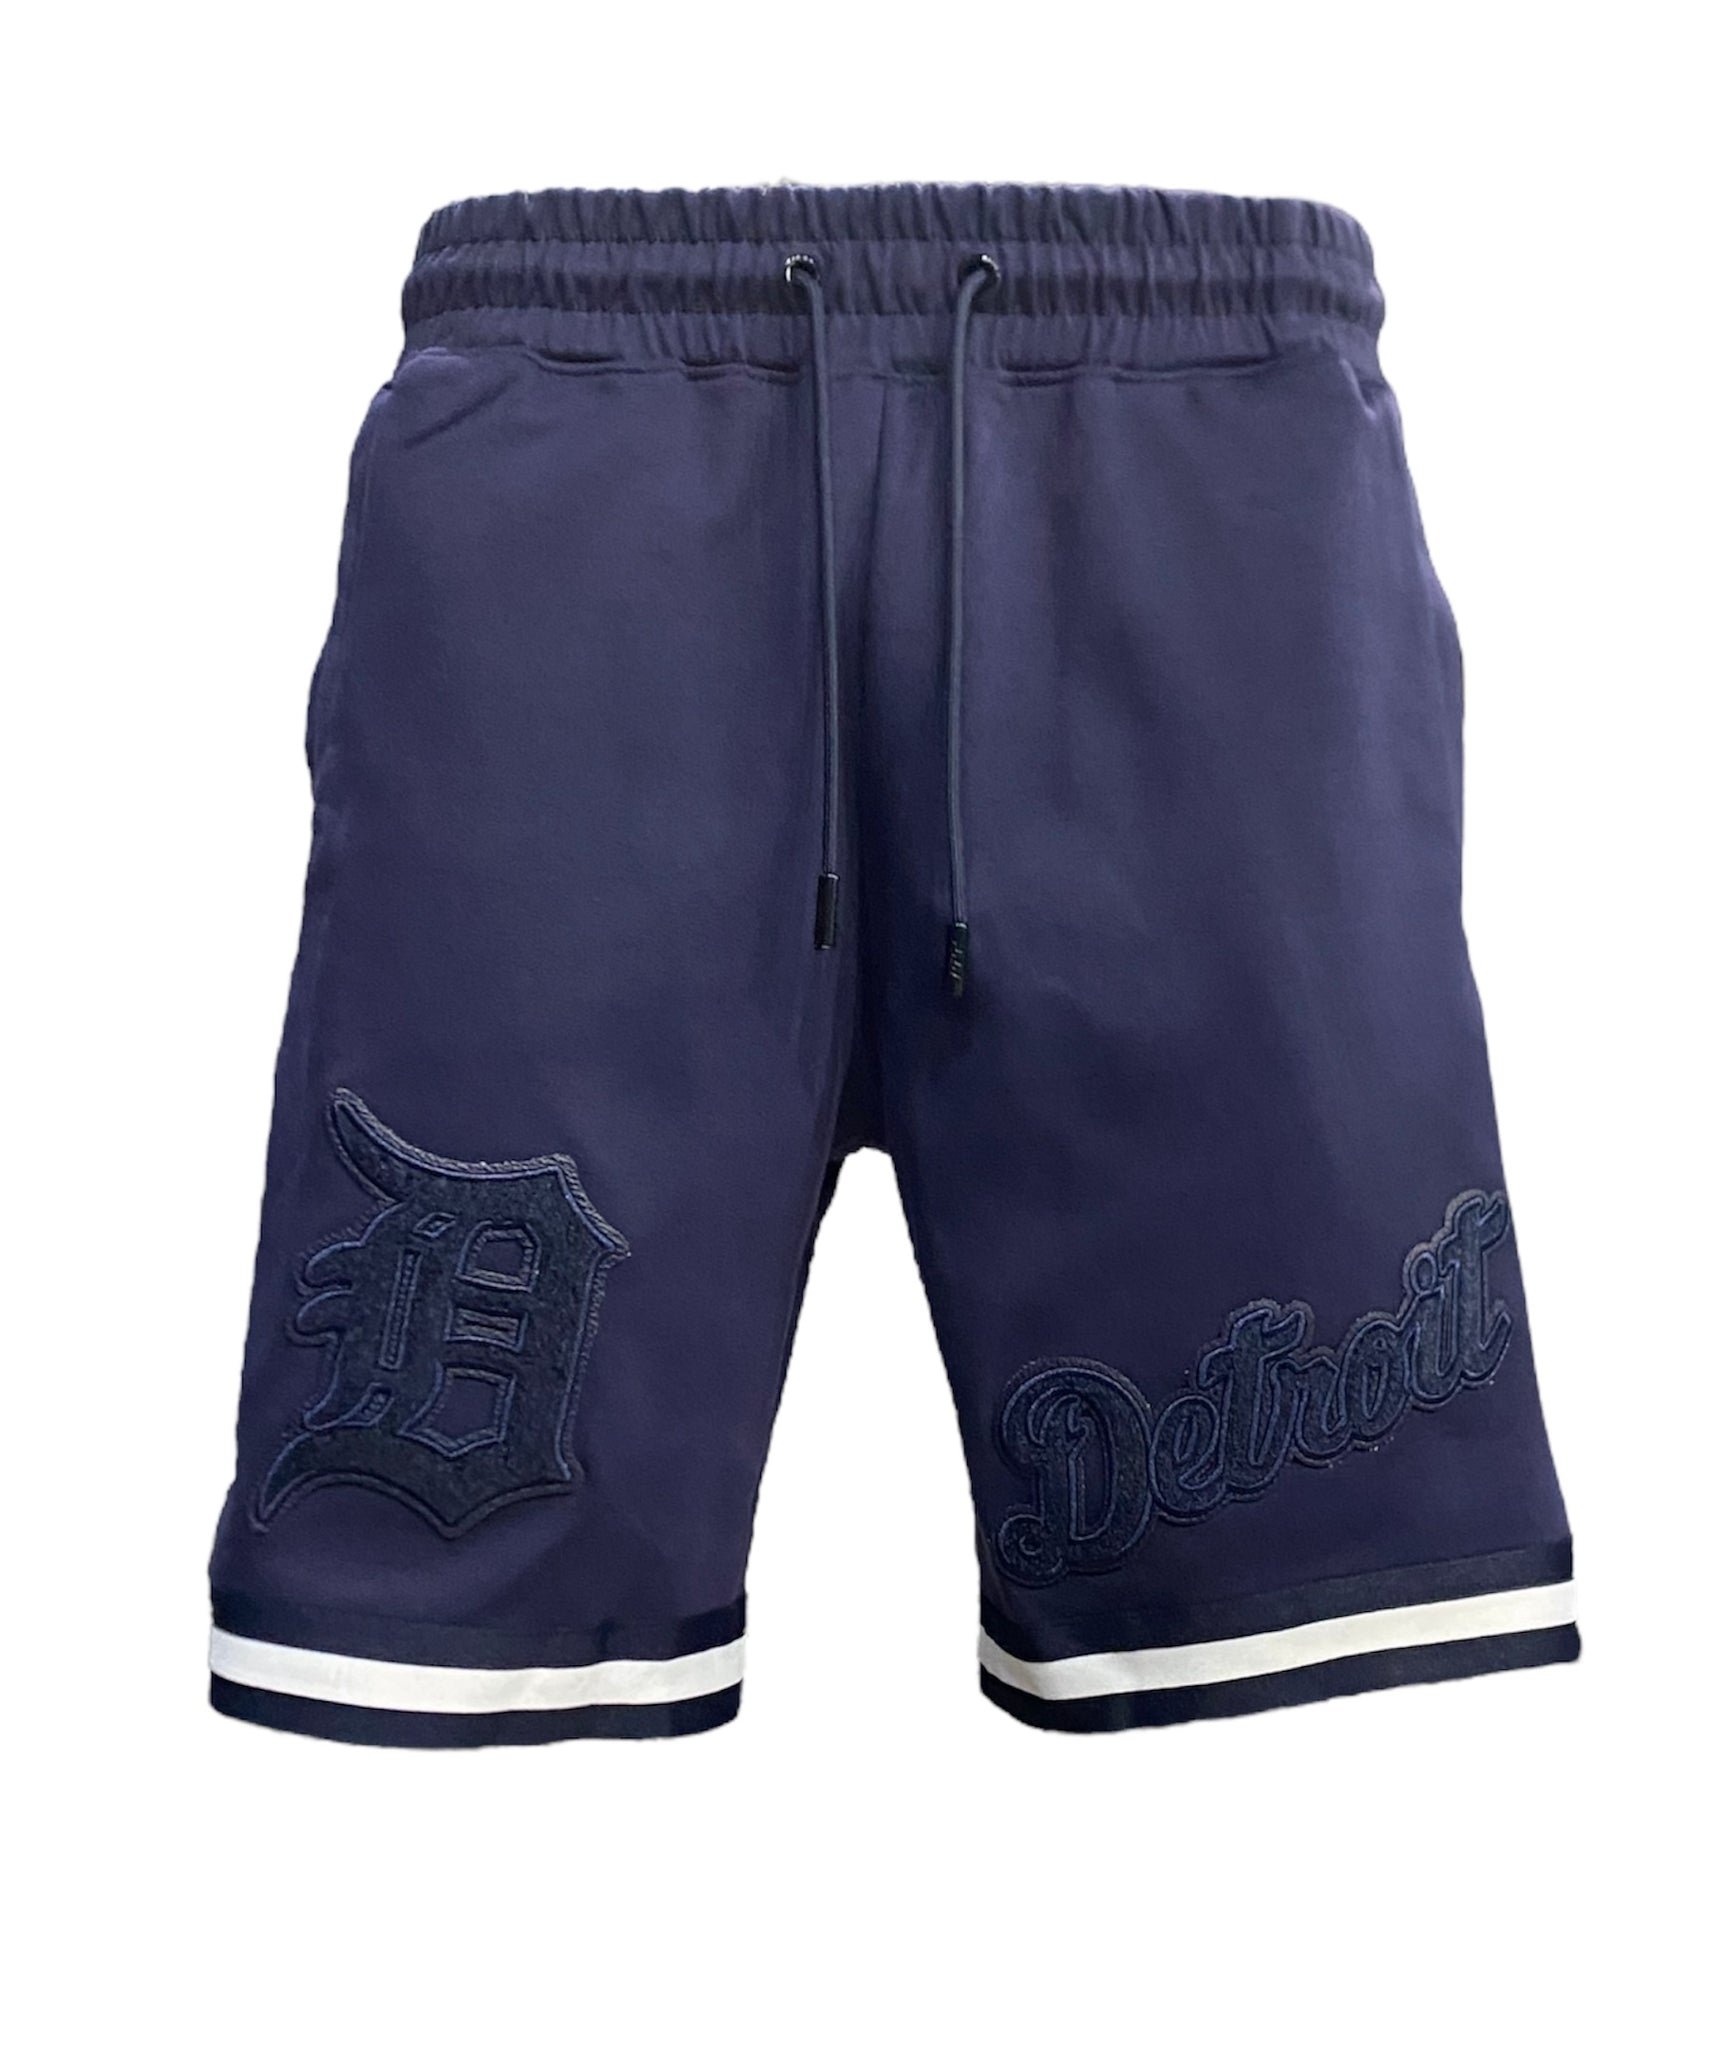 Pro Tigers Logo Embroidered Shorts Navy